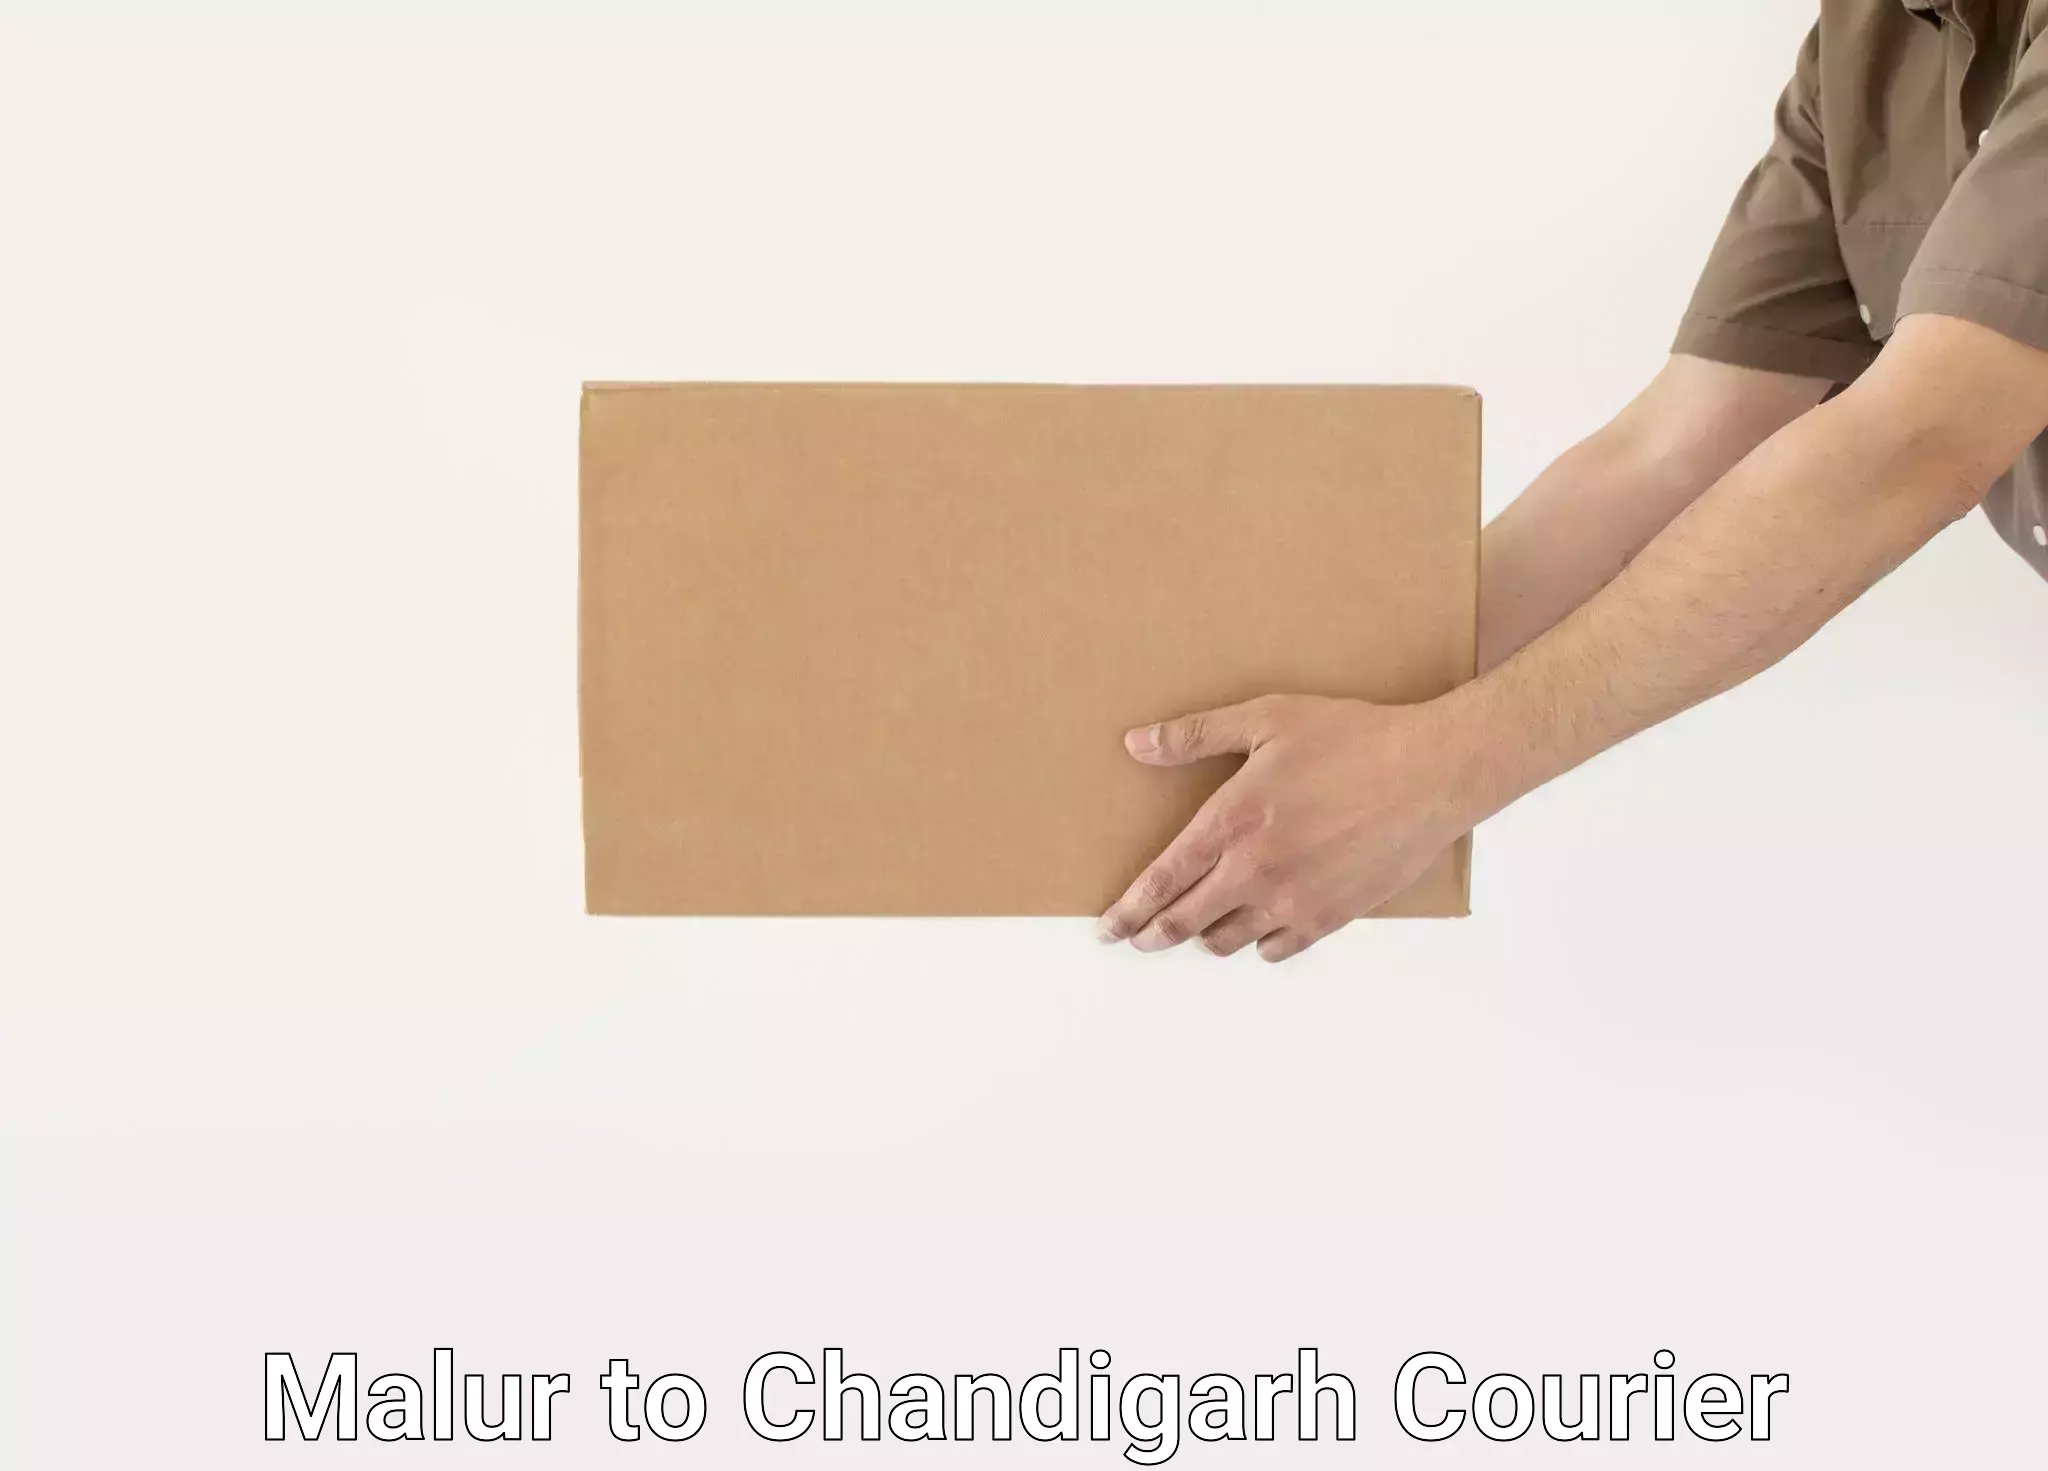 Furniture transport experts Malur to Chandigarh